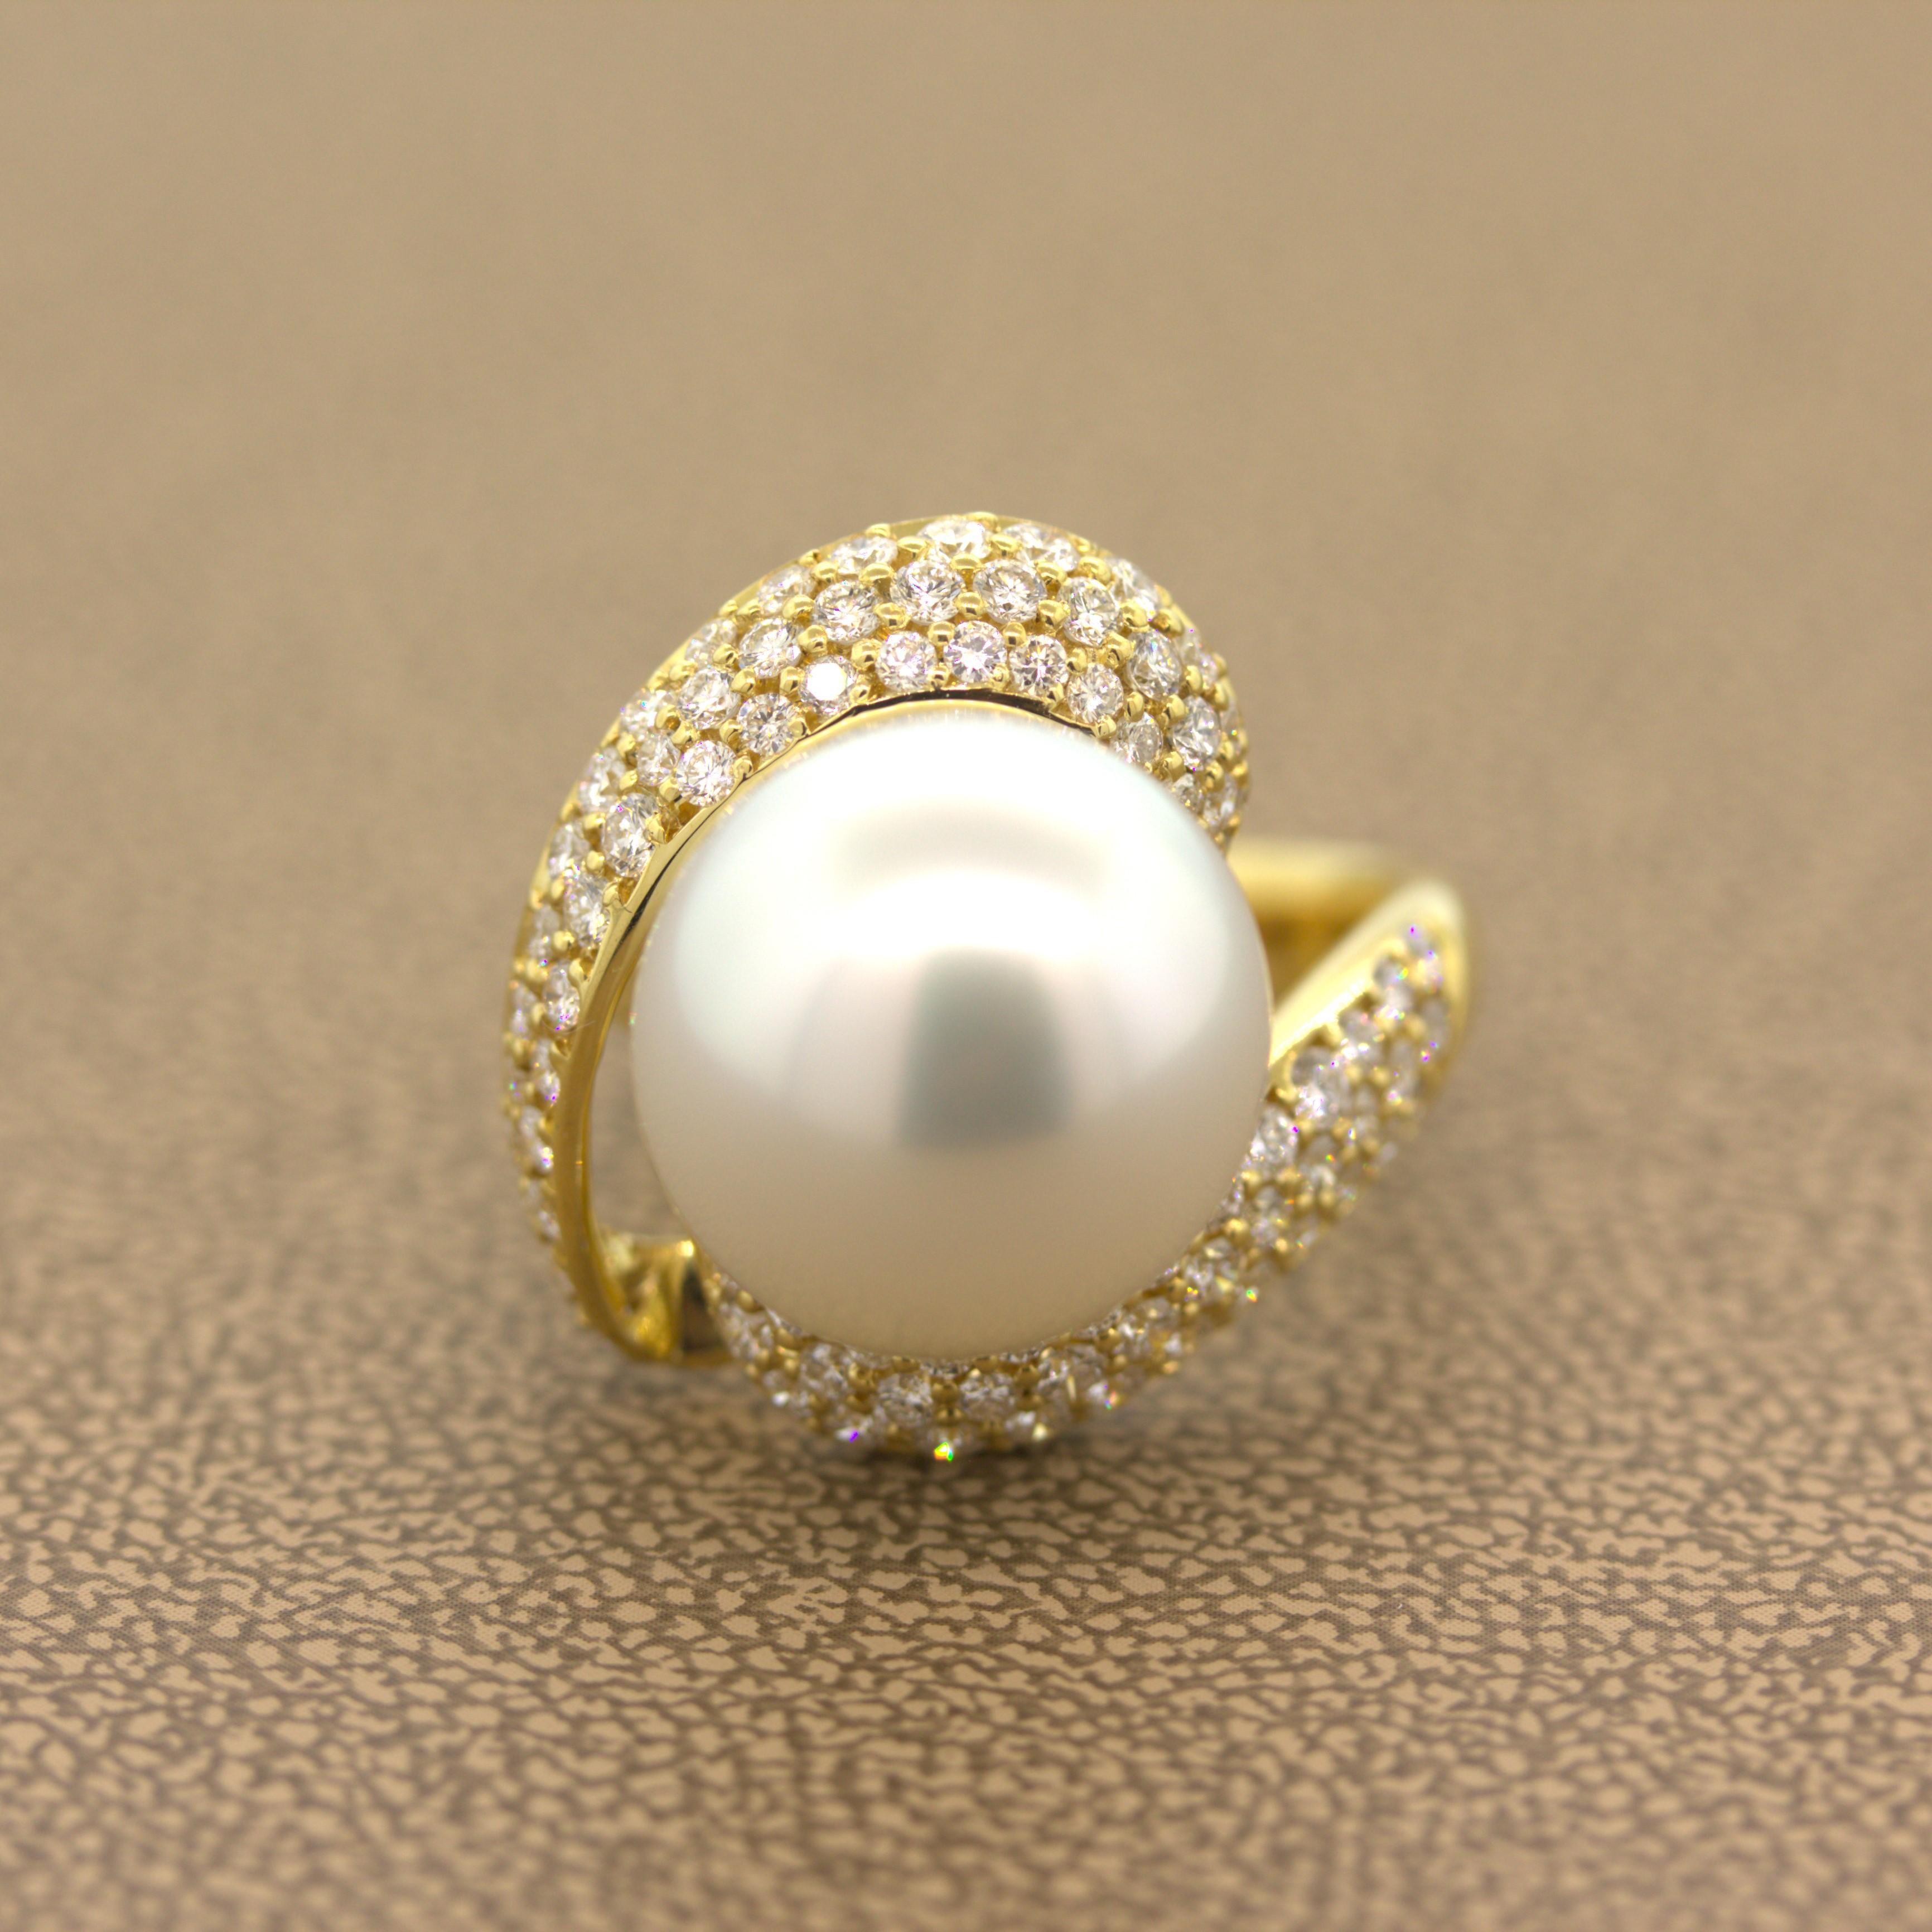 A lovely piece featuring a fine 14mm South Sea pearl. The pearl has a clean white color with excellent luster and nacre quality. Adding to that, the pearl is rounded with no blemishes or imperfections. It is complemented by 1.50 carats of round